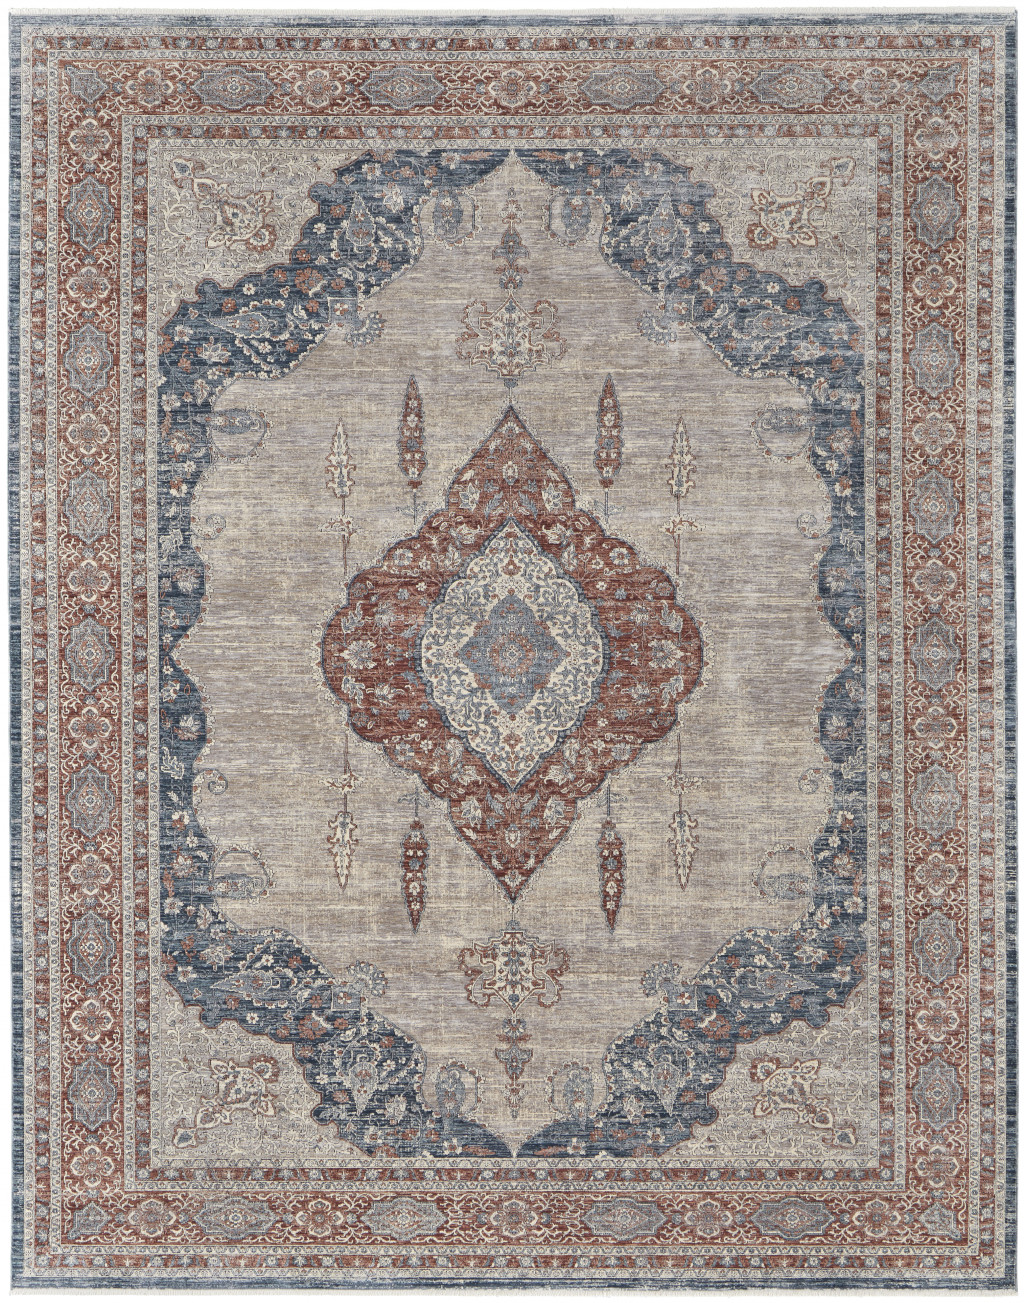 12' X 15' Gray Red And Blue Floral Power Loom Stain Resistant Area Rug-514463-1